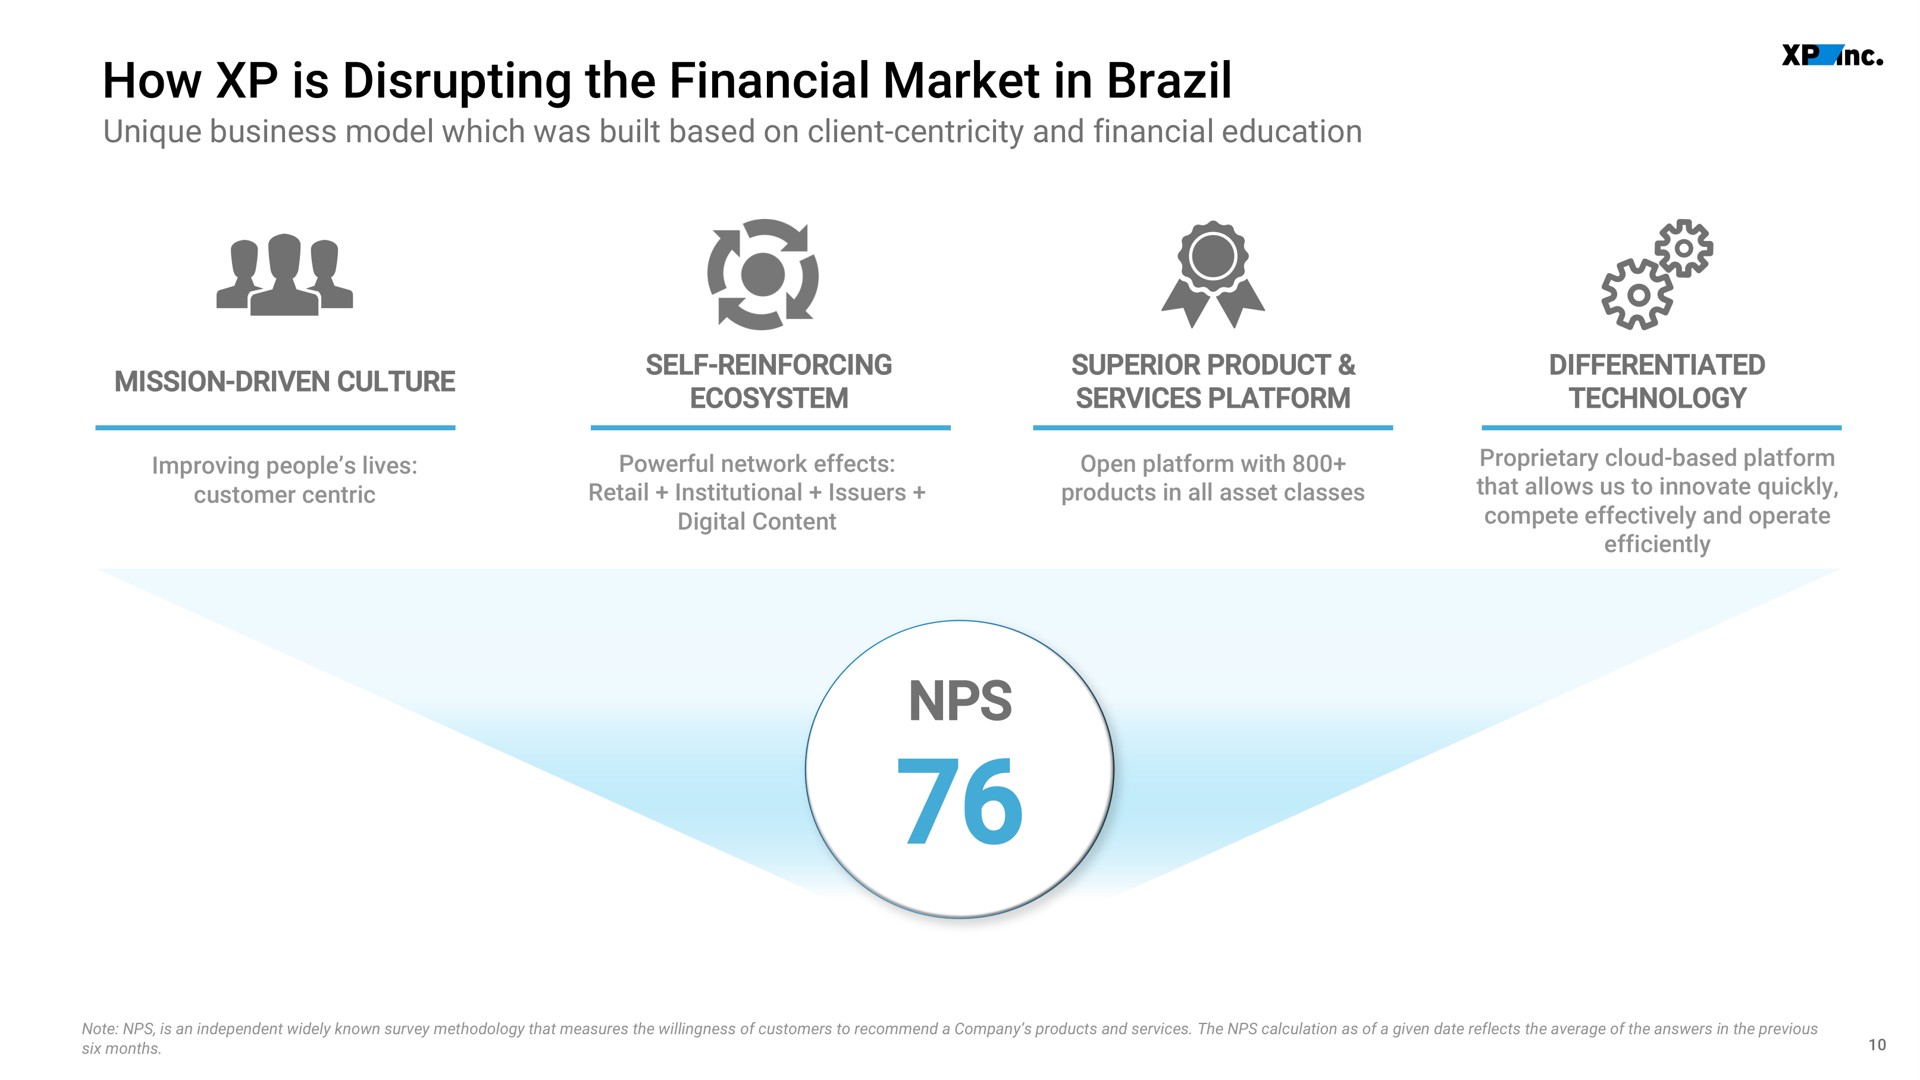 how is disrupting the financial market in brazil mission driven culture ecosystem services platform | XP Inc